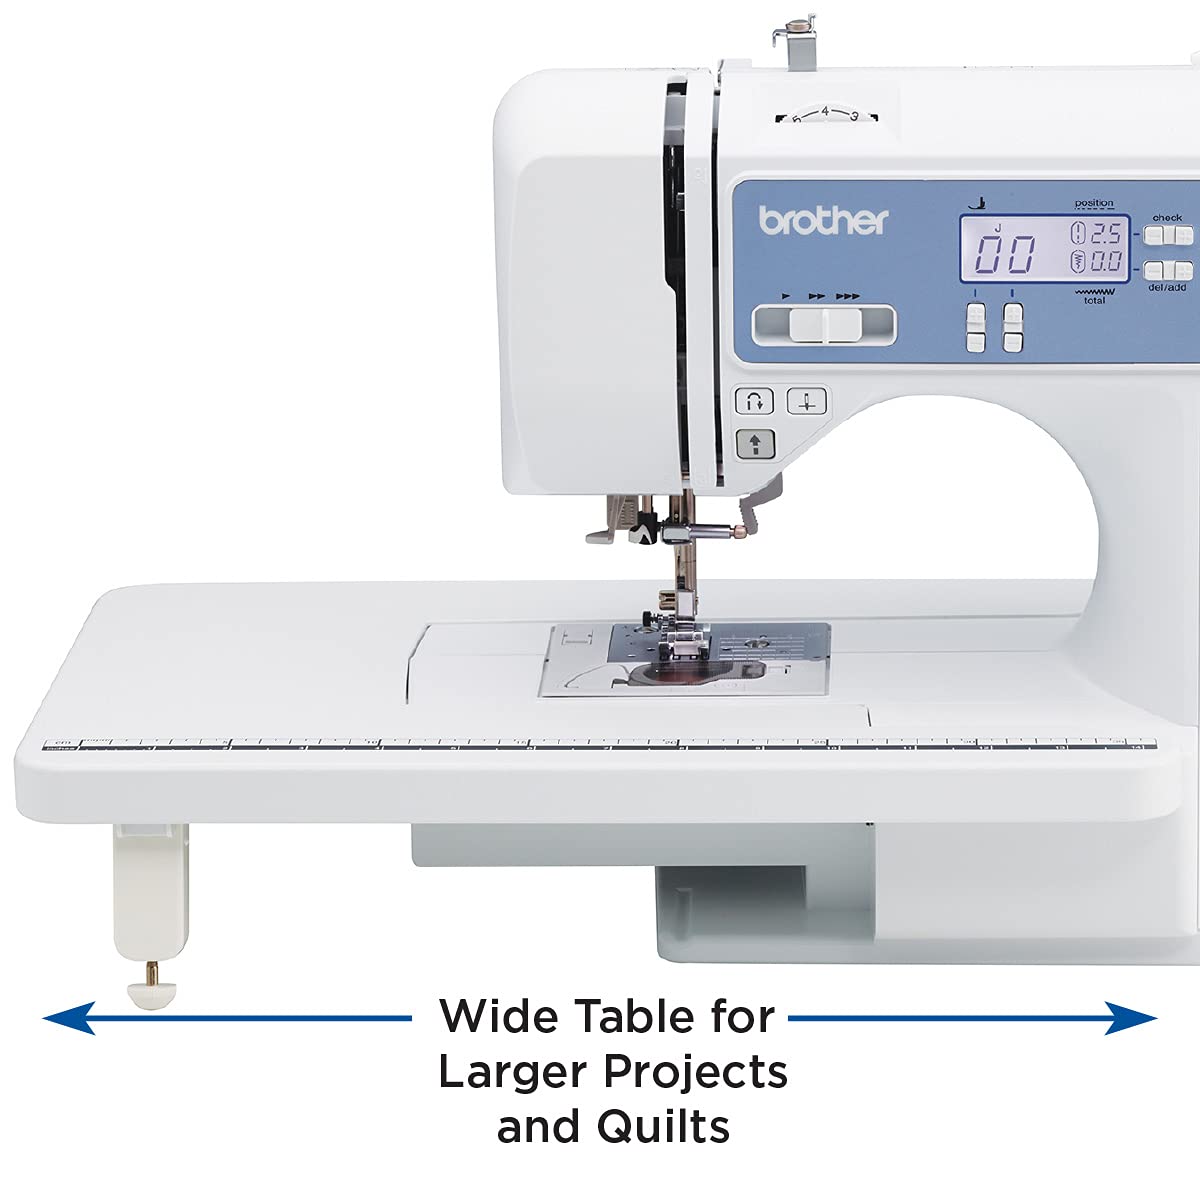 Brother XR9550 Sewing and Quilting Machine with LCD, Wide Table, 8-Sewing Feet - image 2 of 7